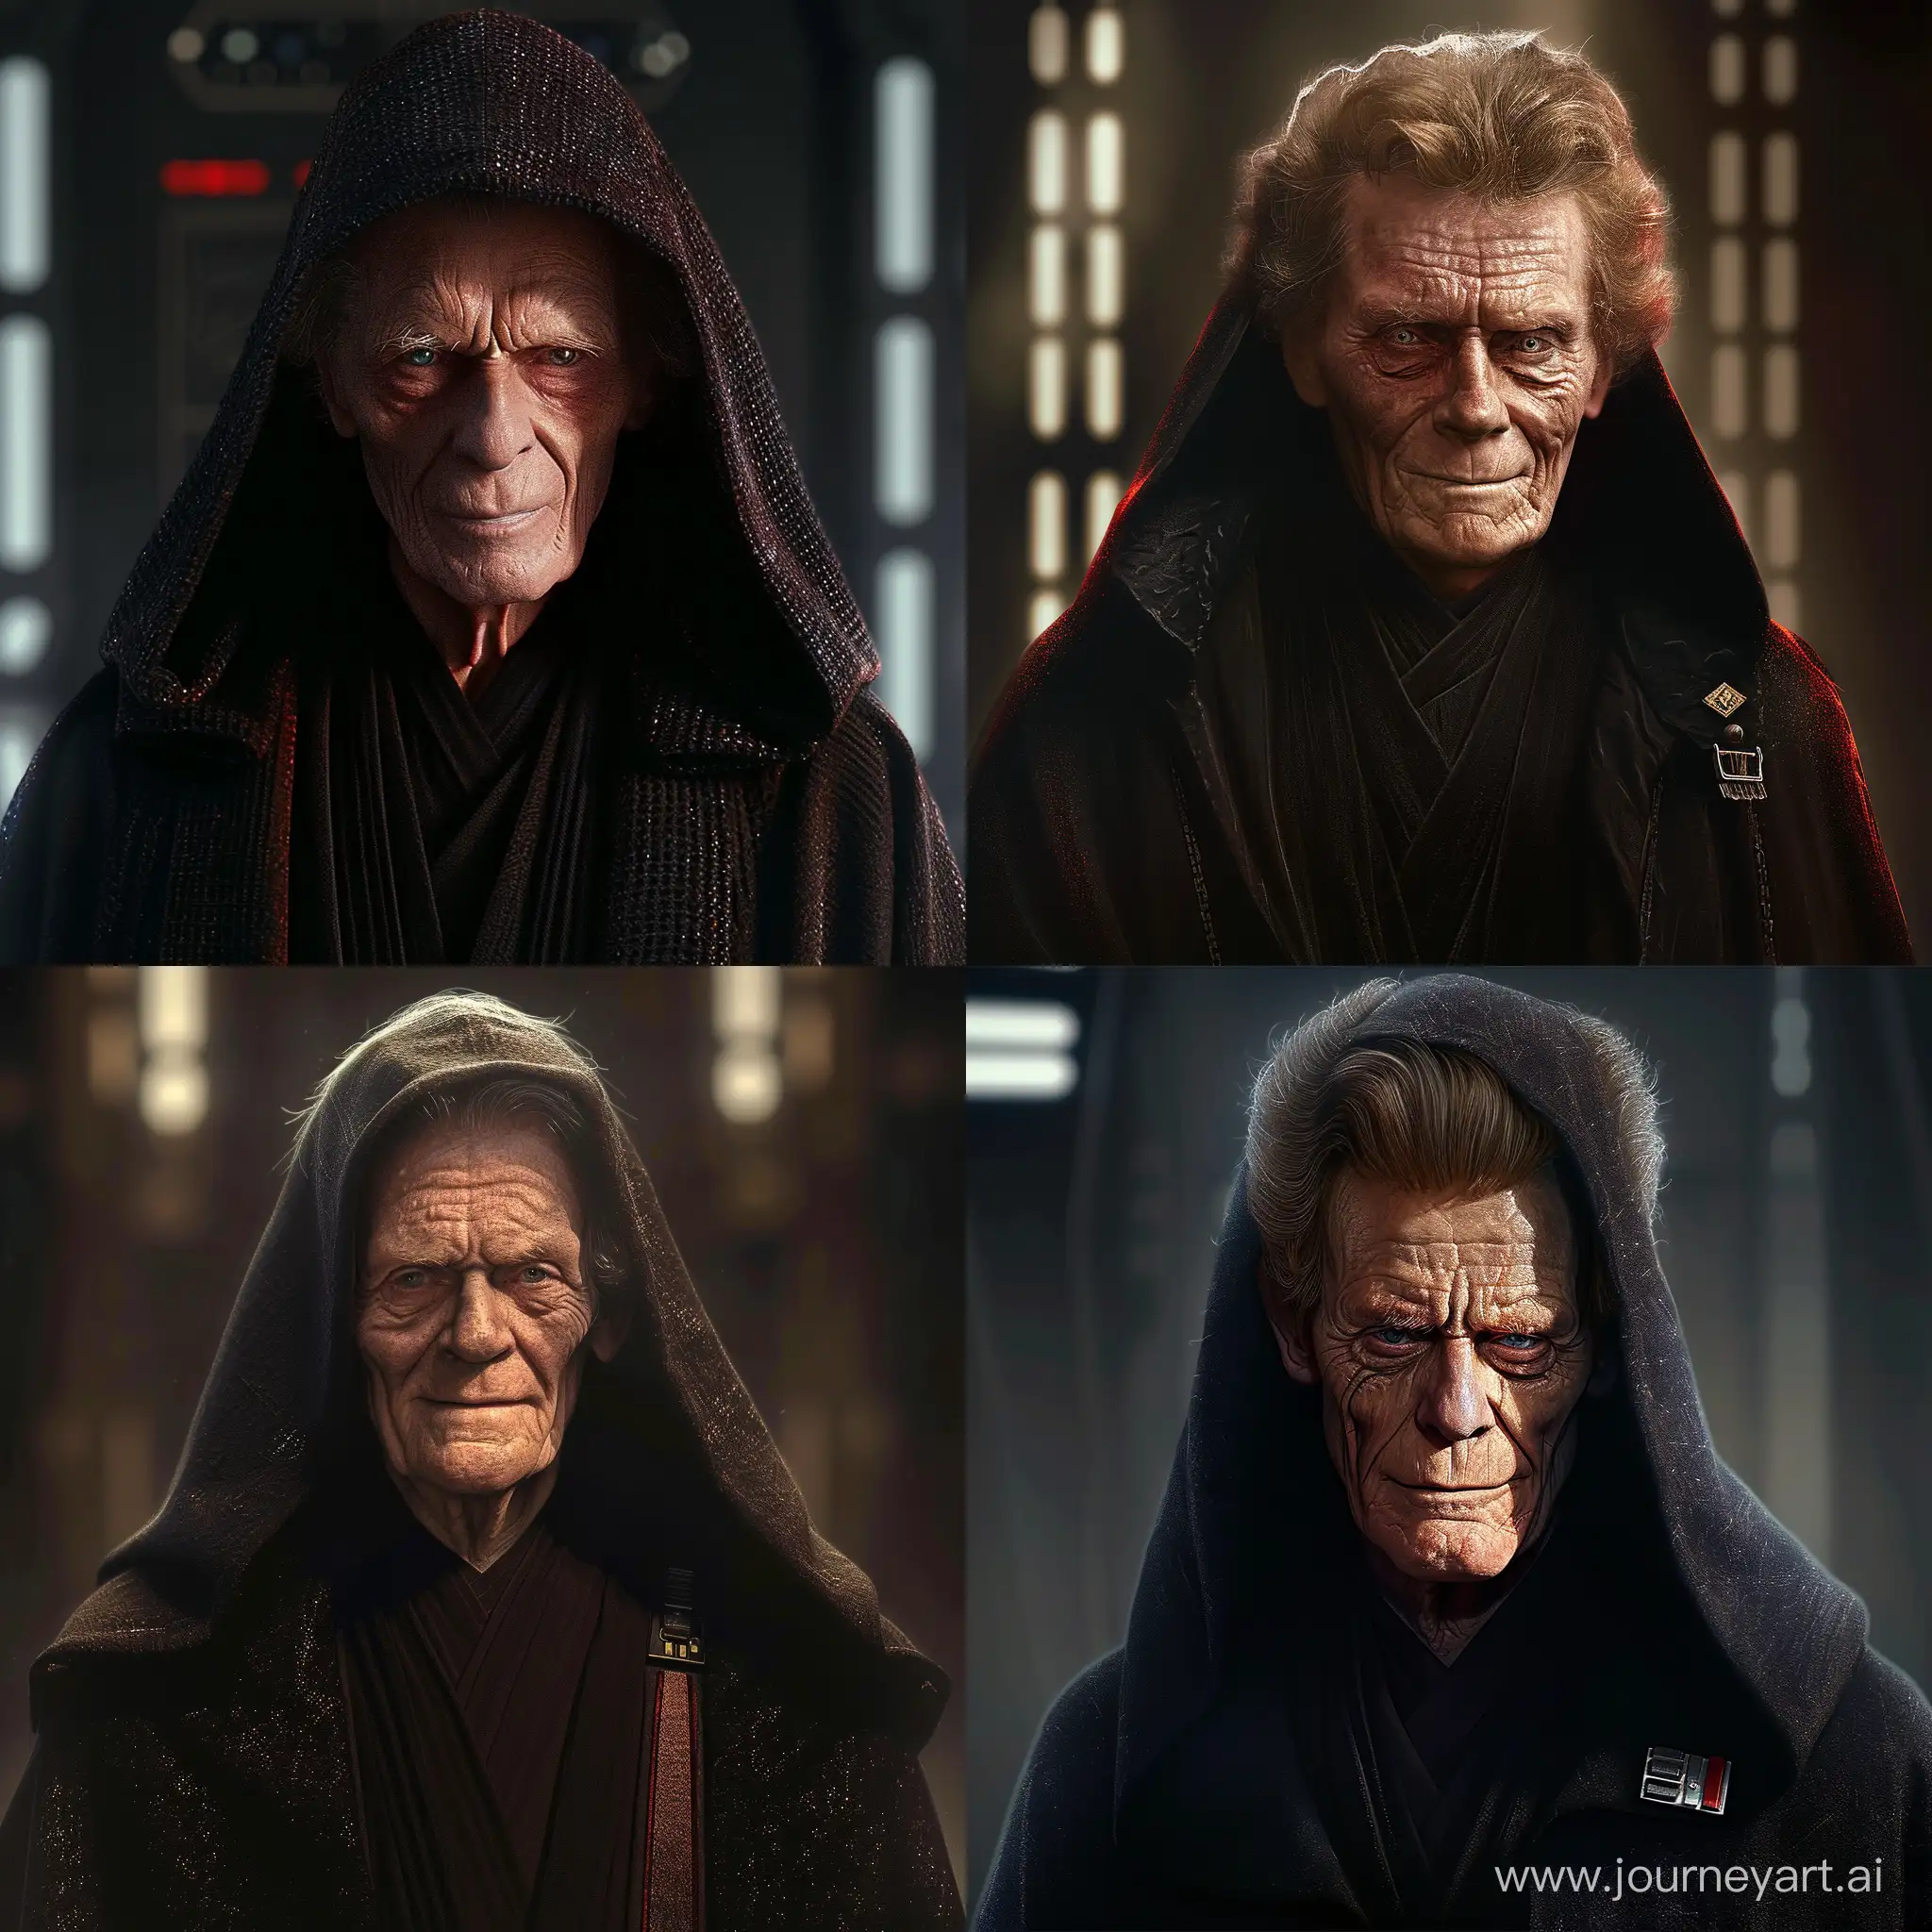 Willem-Dafoe-as-Chancellor-Palpatine-Dark-and-Cunning-Sith-Lord